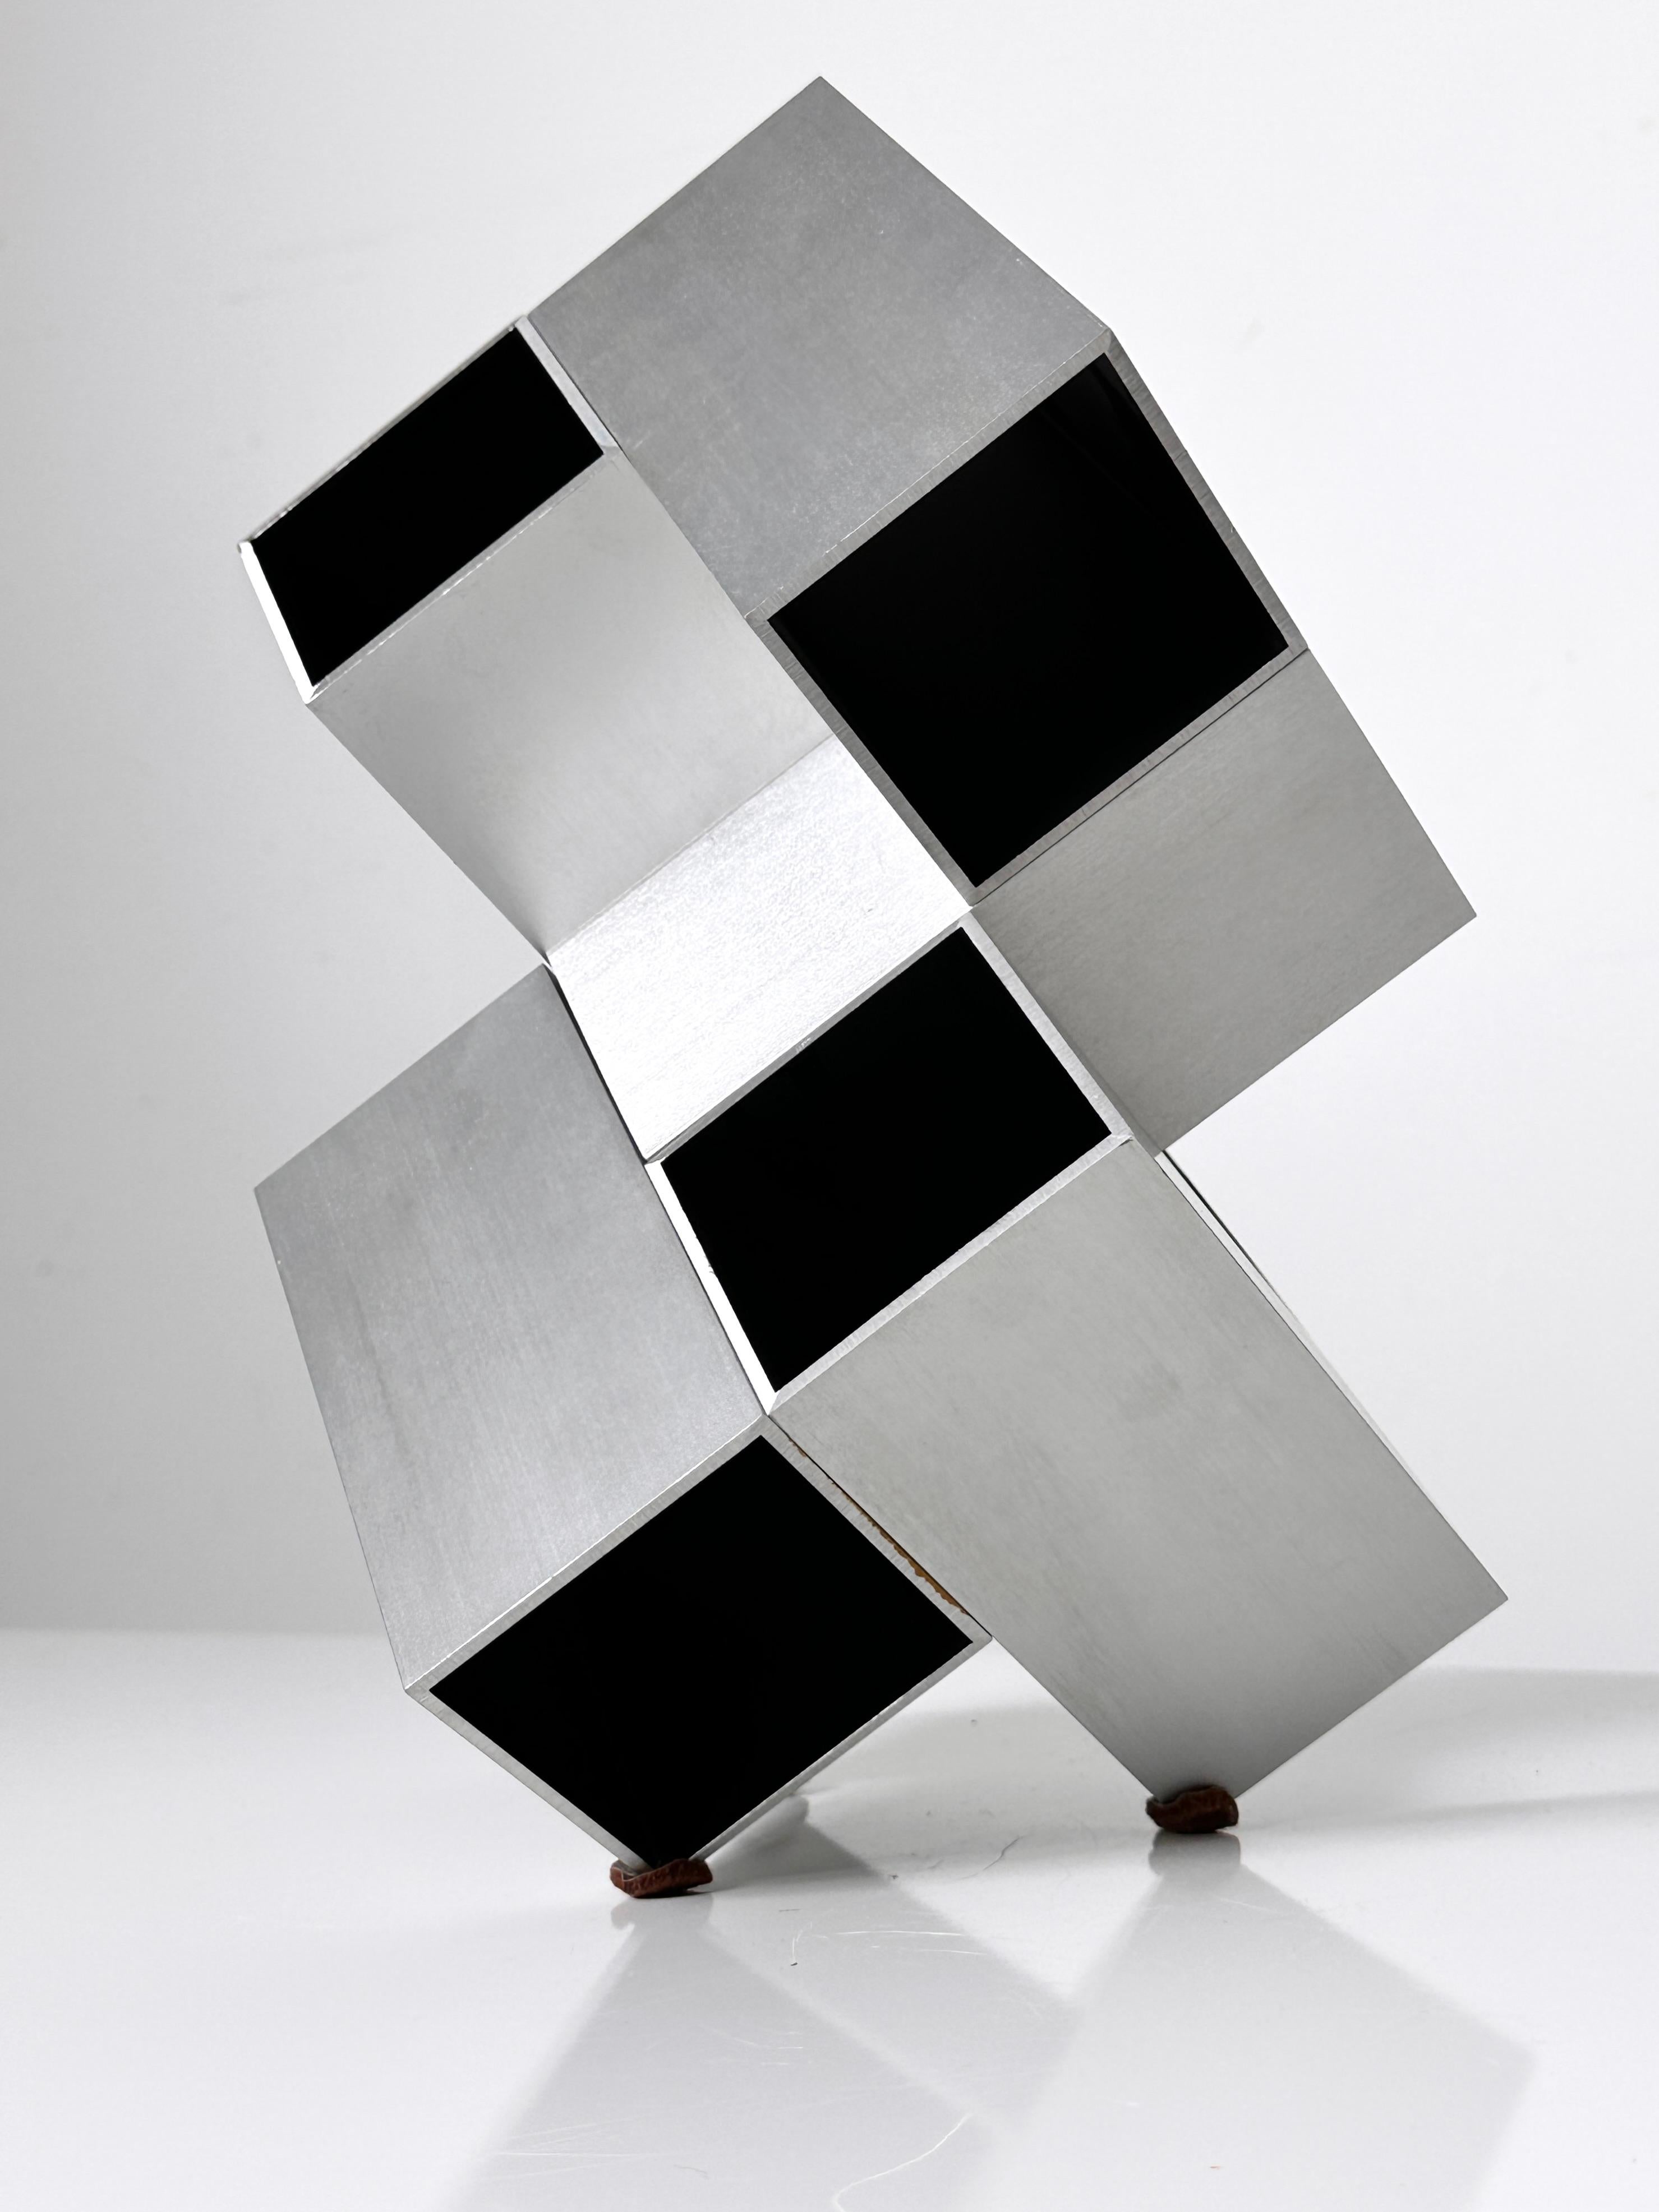 Modular Cube Sculpture by Kosso Eloul Israeli Artist 1920-1995 Toronto Canada  In Good Condition For Sale In Ann Arbor, MI